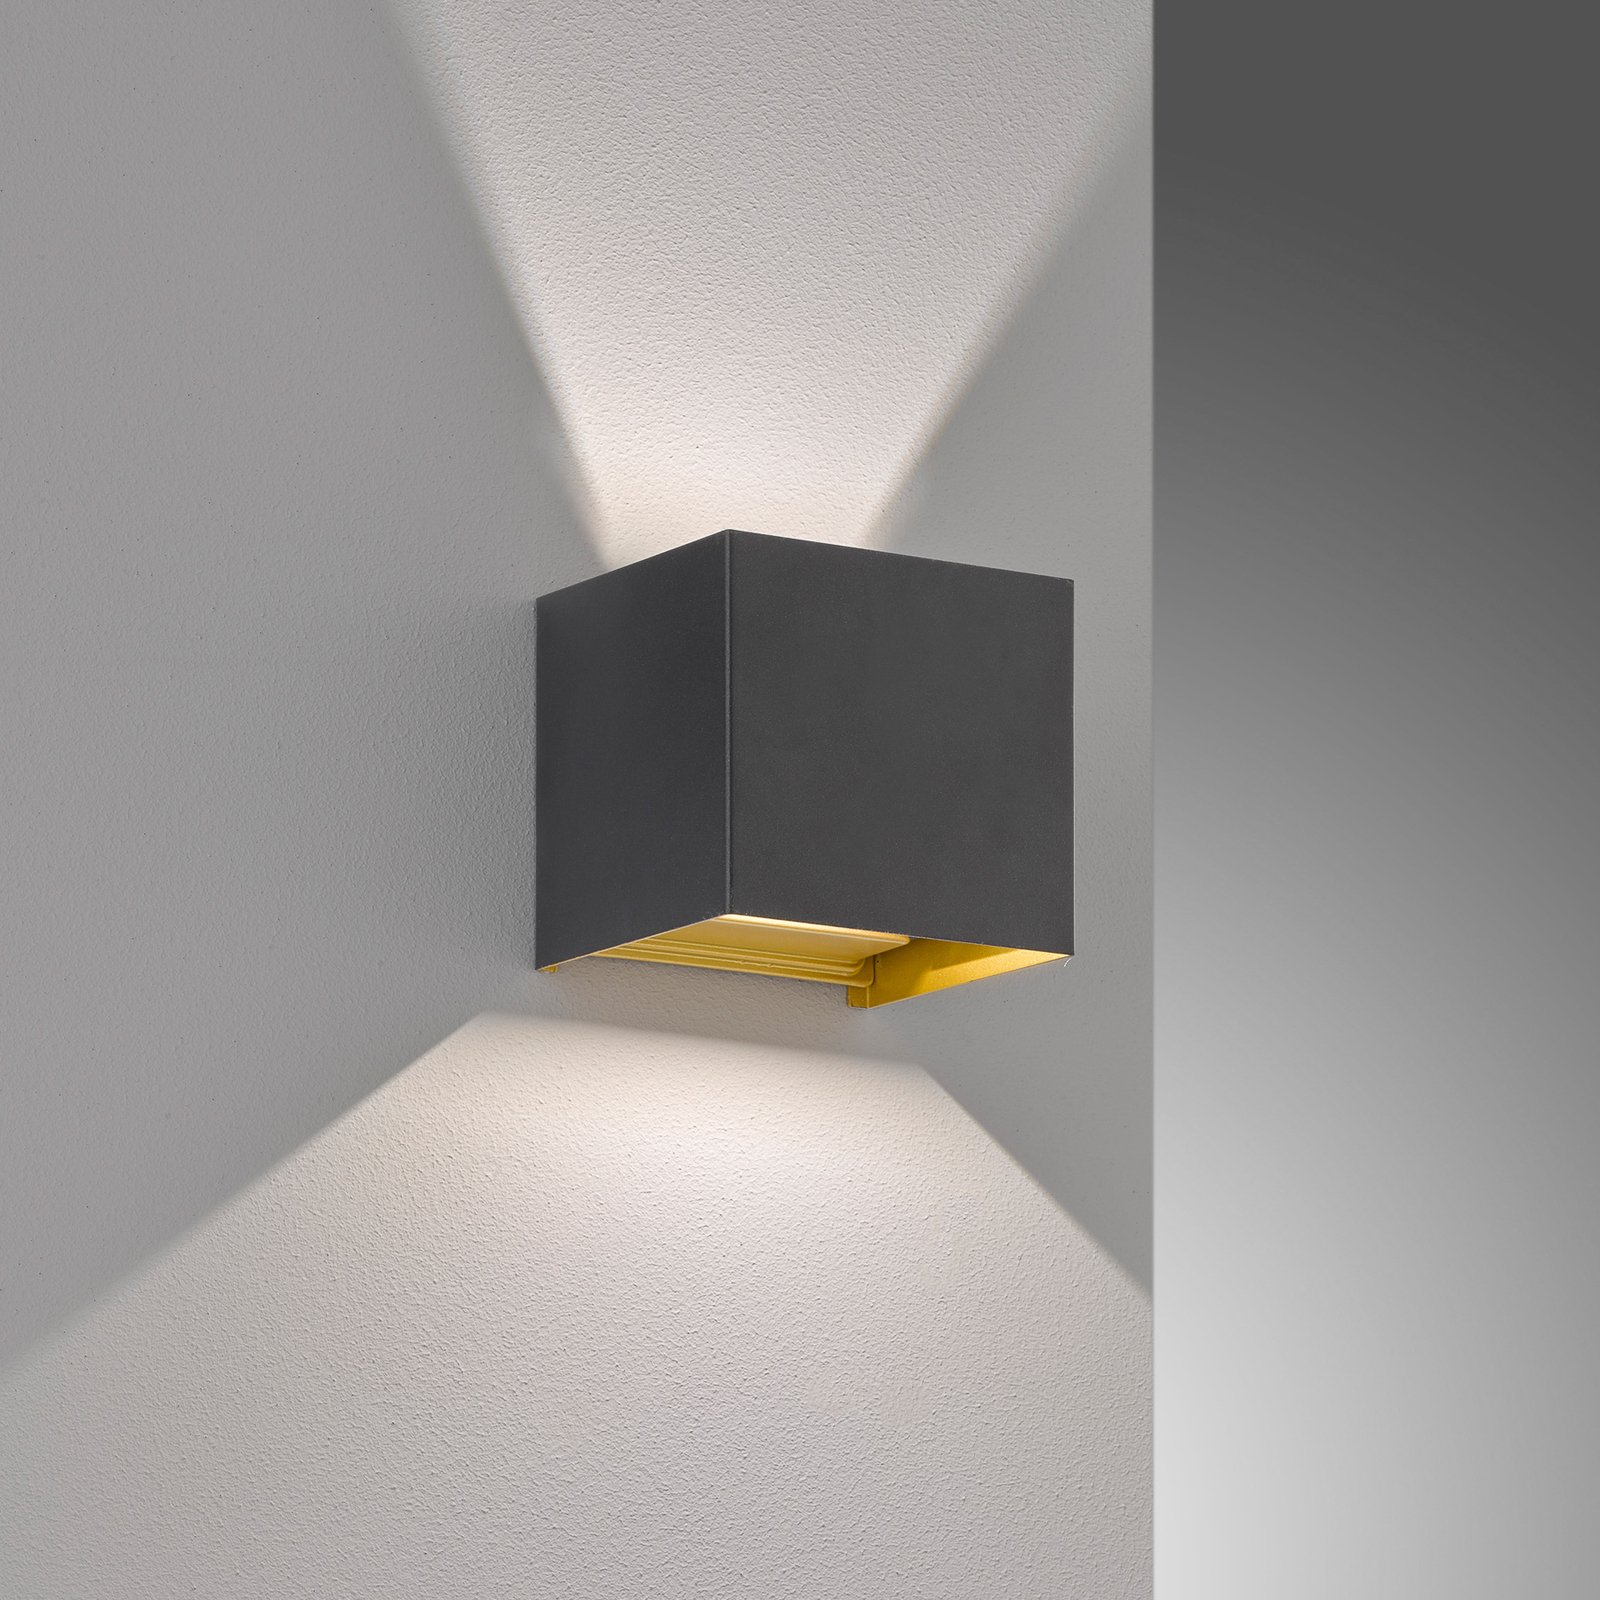 Thore LED outdoor wall light, black/gold-coloured, width 11 cm